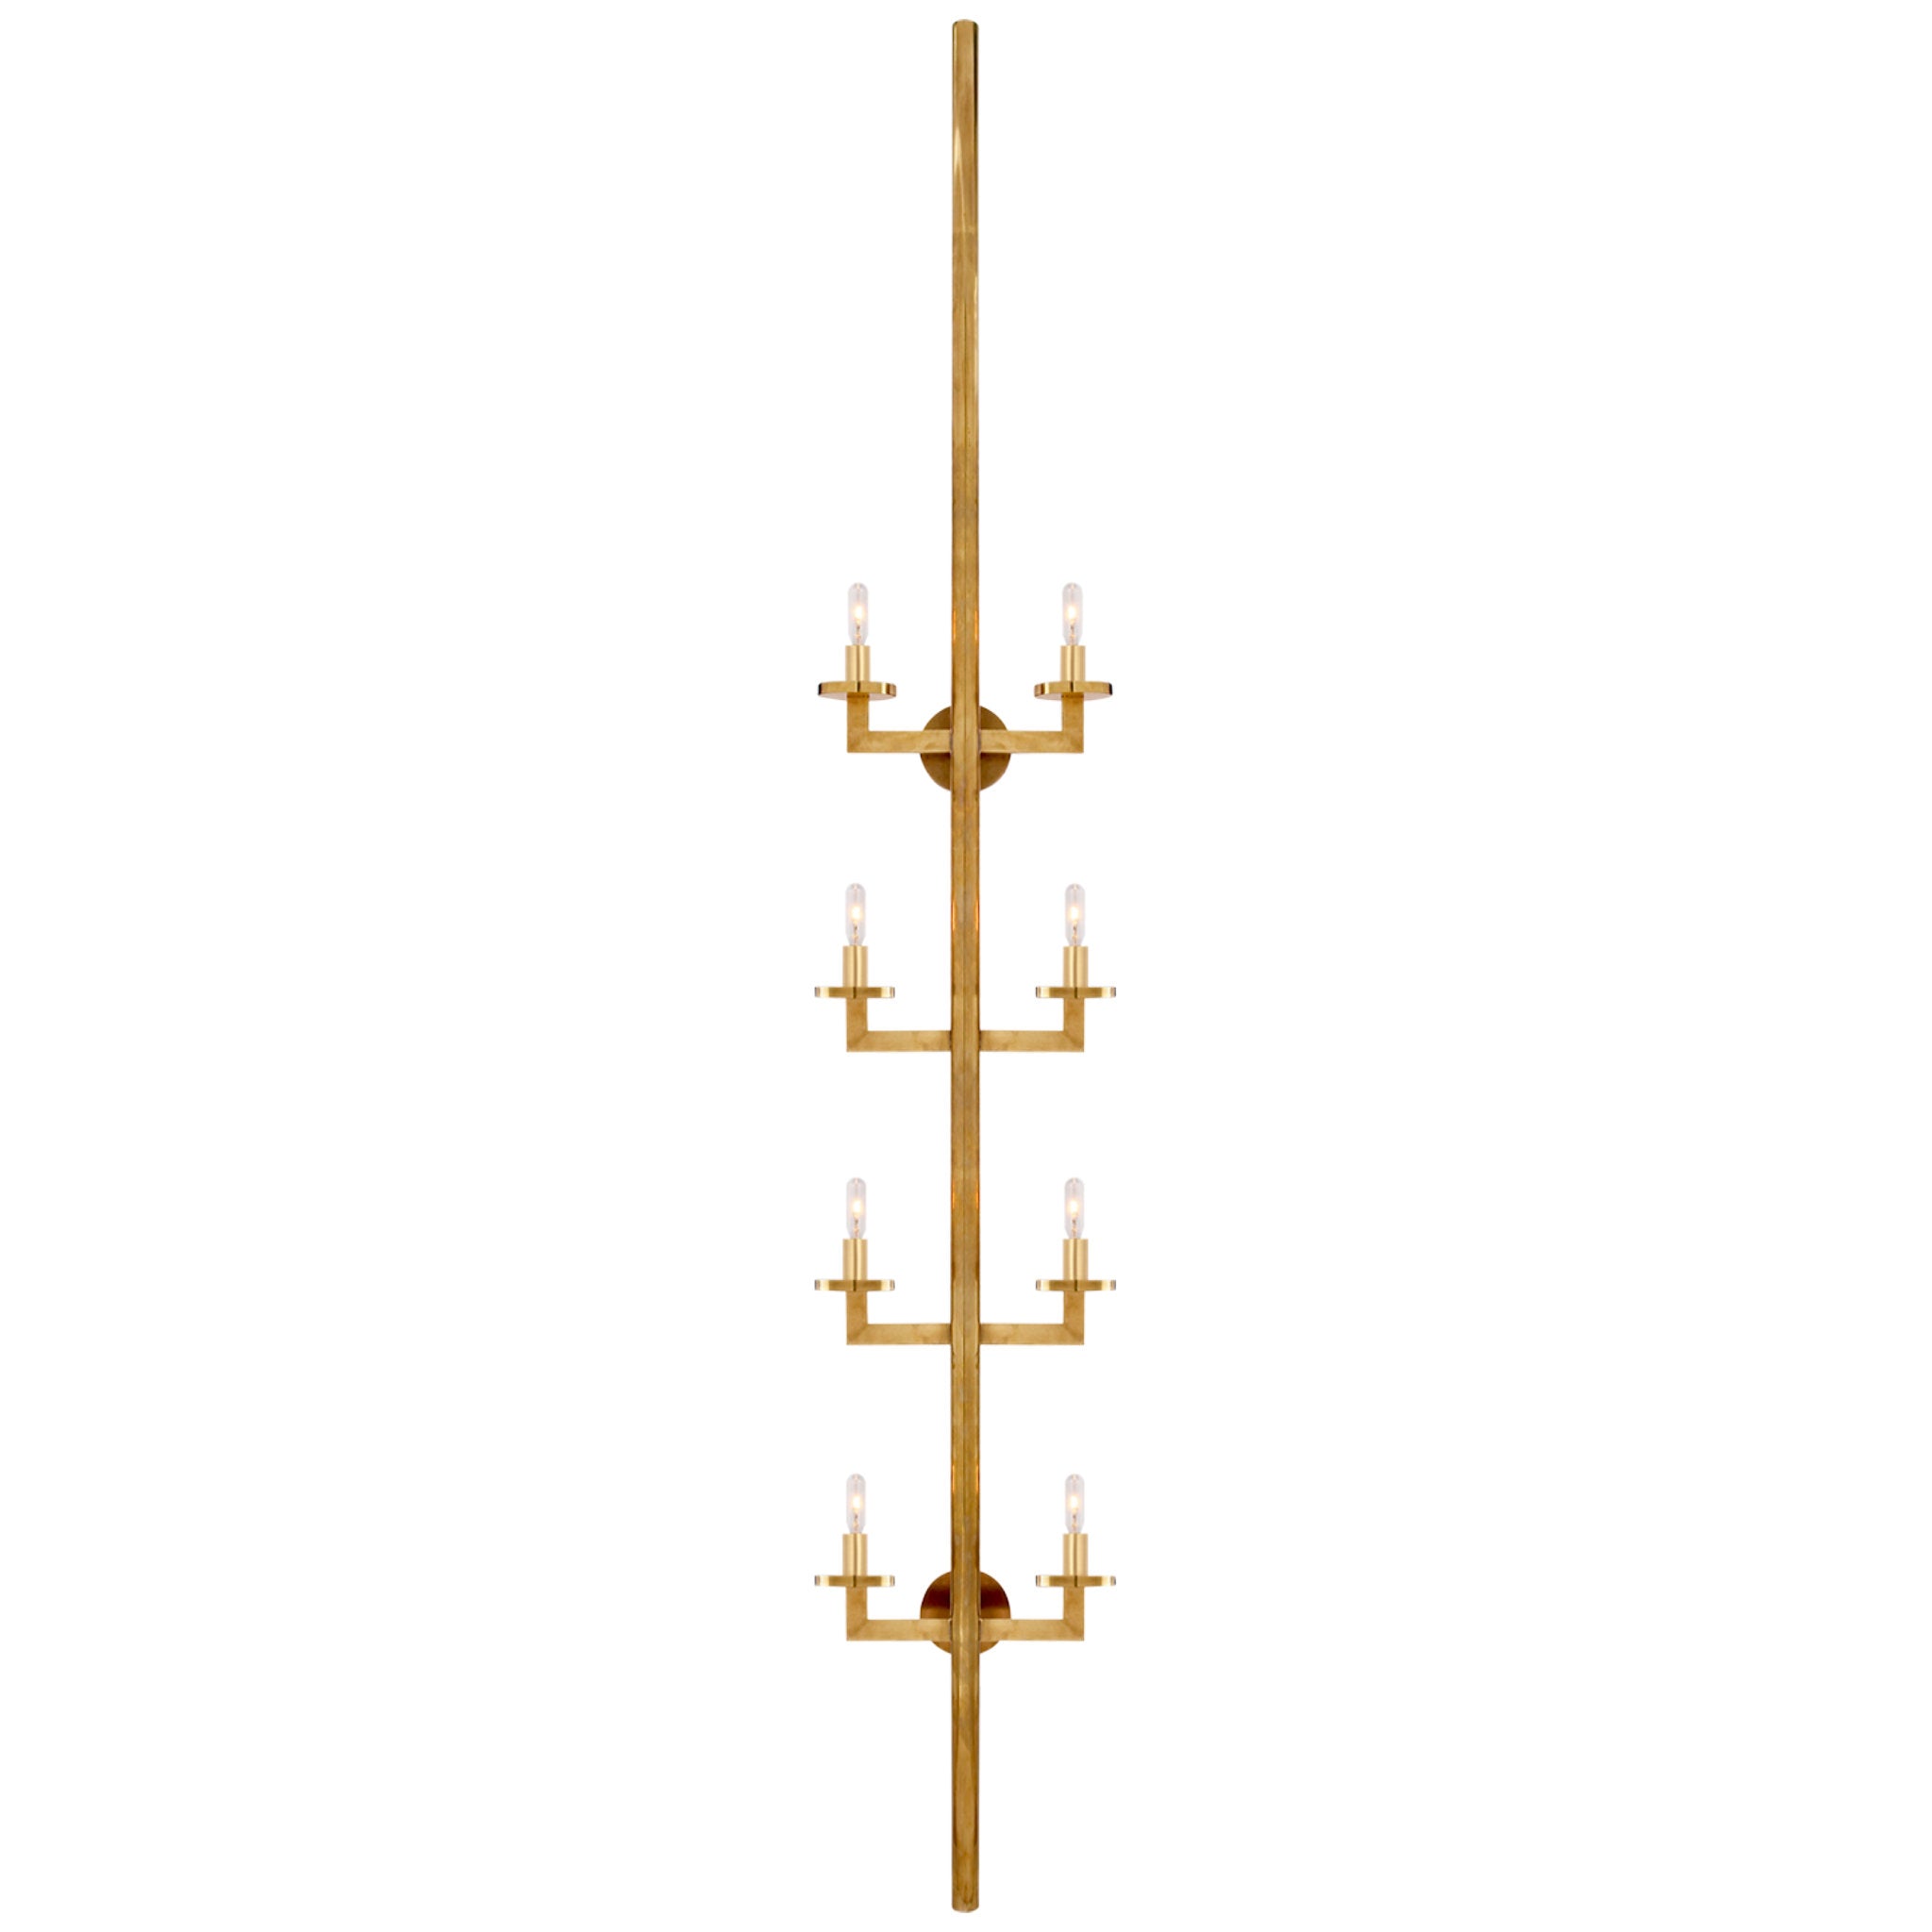 Kelly Wearstler Liaison Statement Sconce in Antique-Burnished Brass